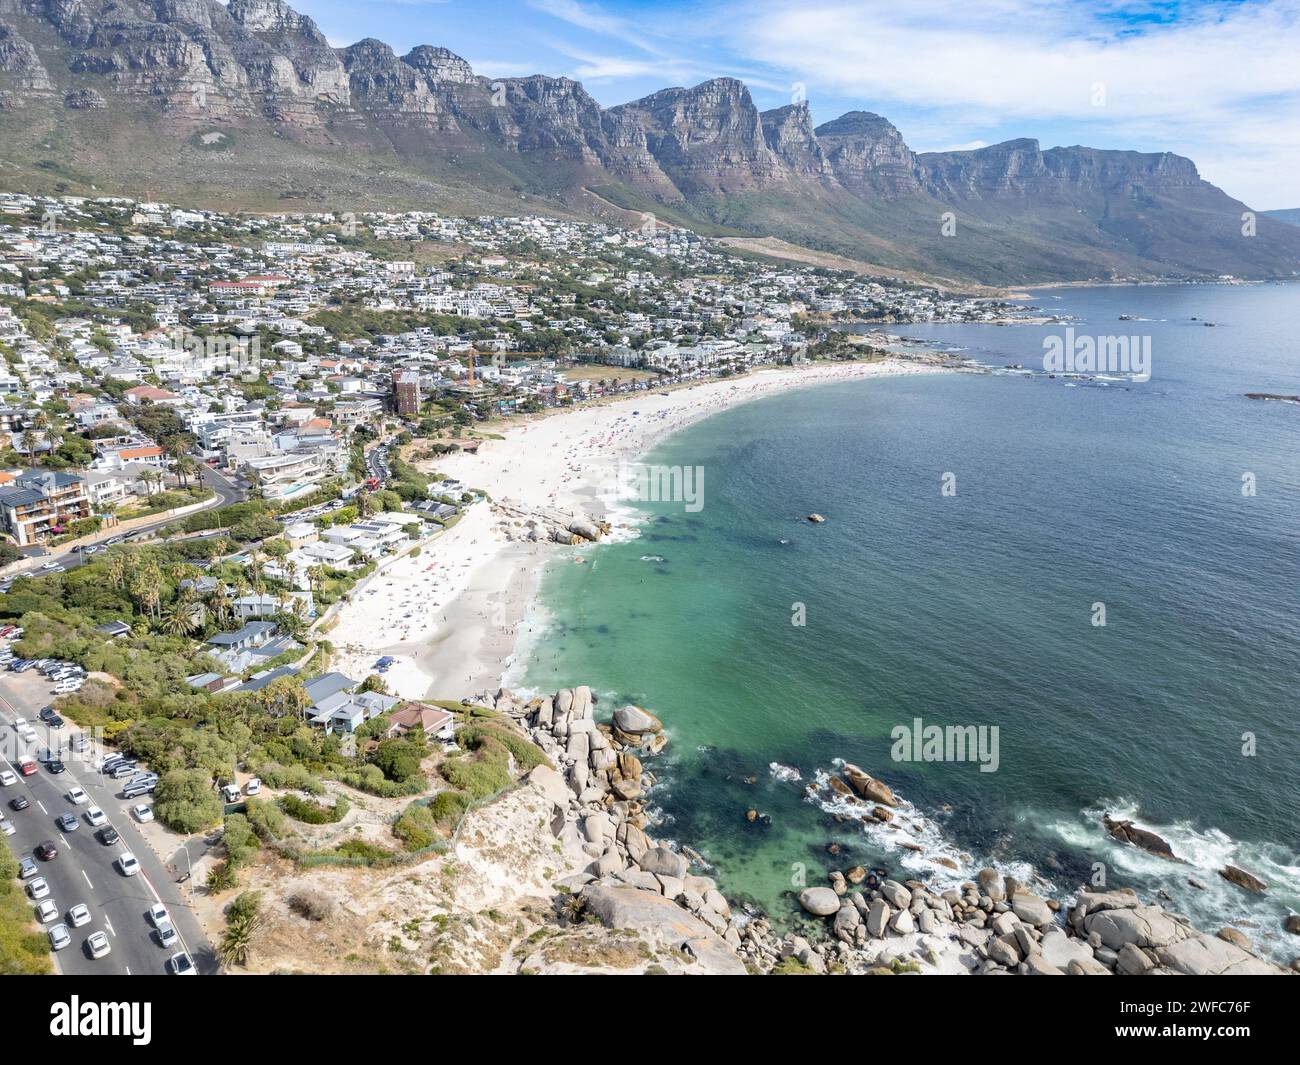 Camps Bay Beach, Camps Bay, Cape Town, South Africa Stock Photo